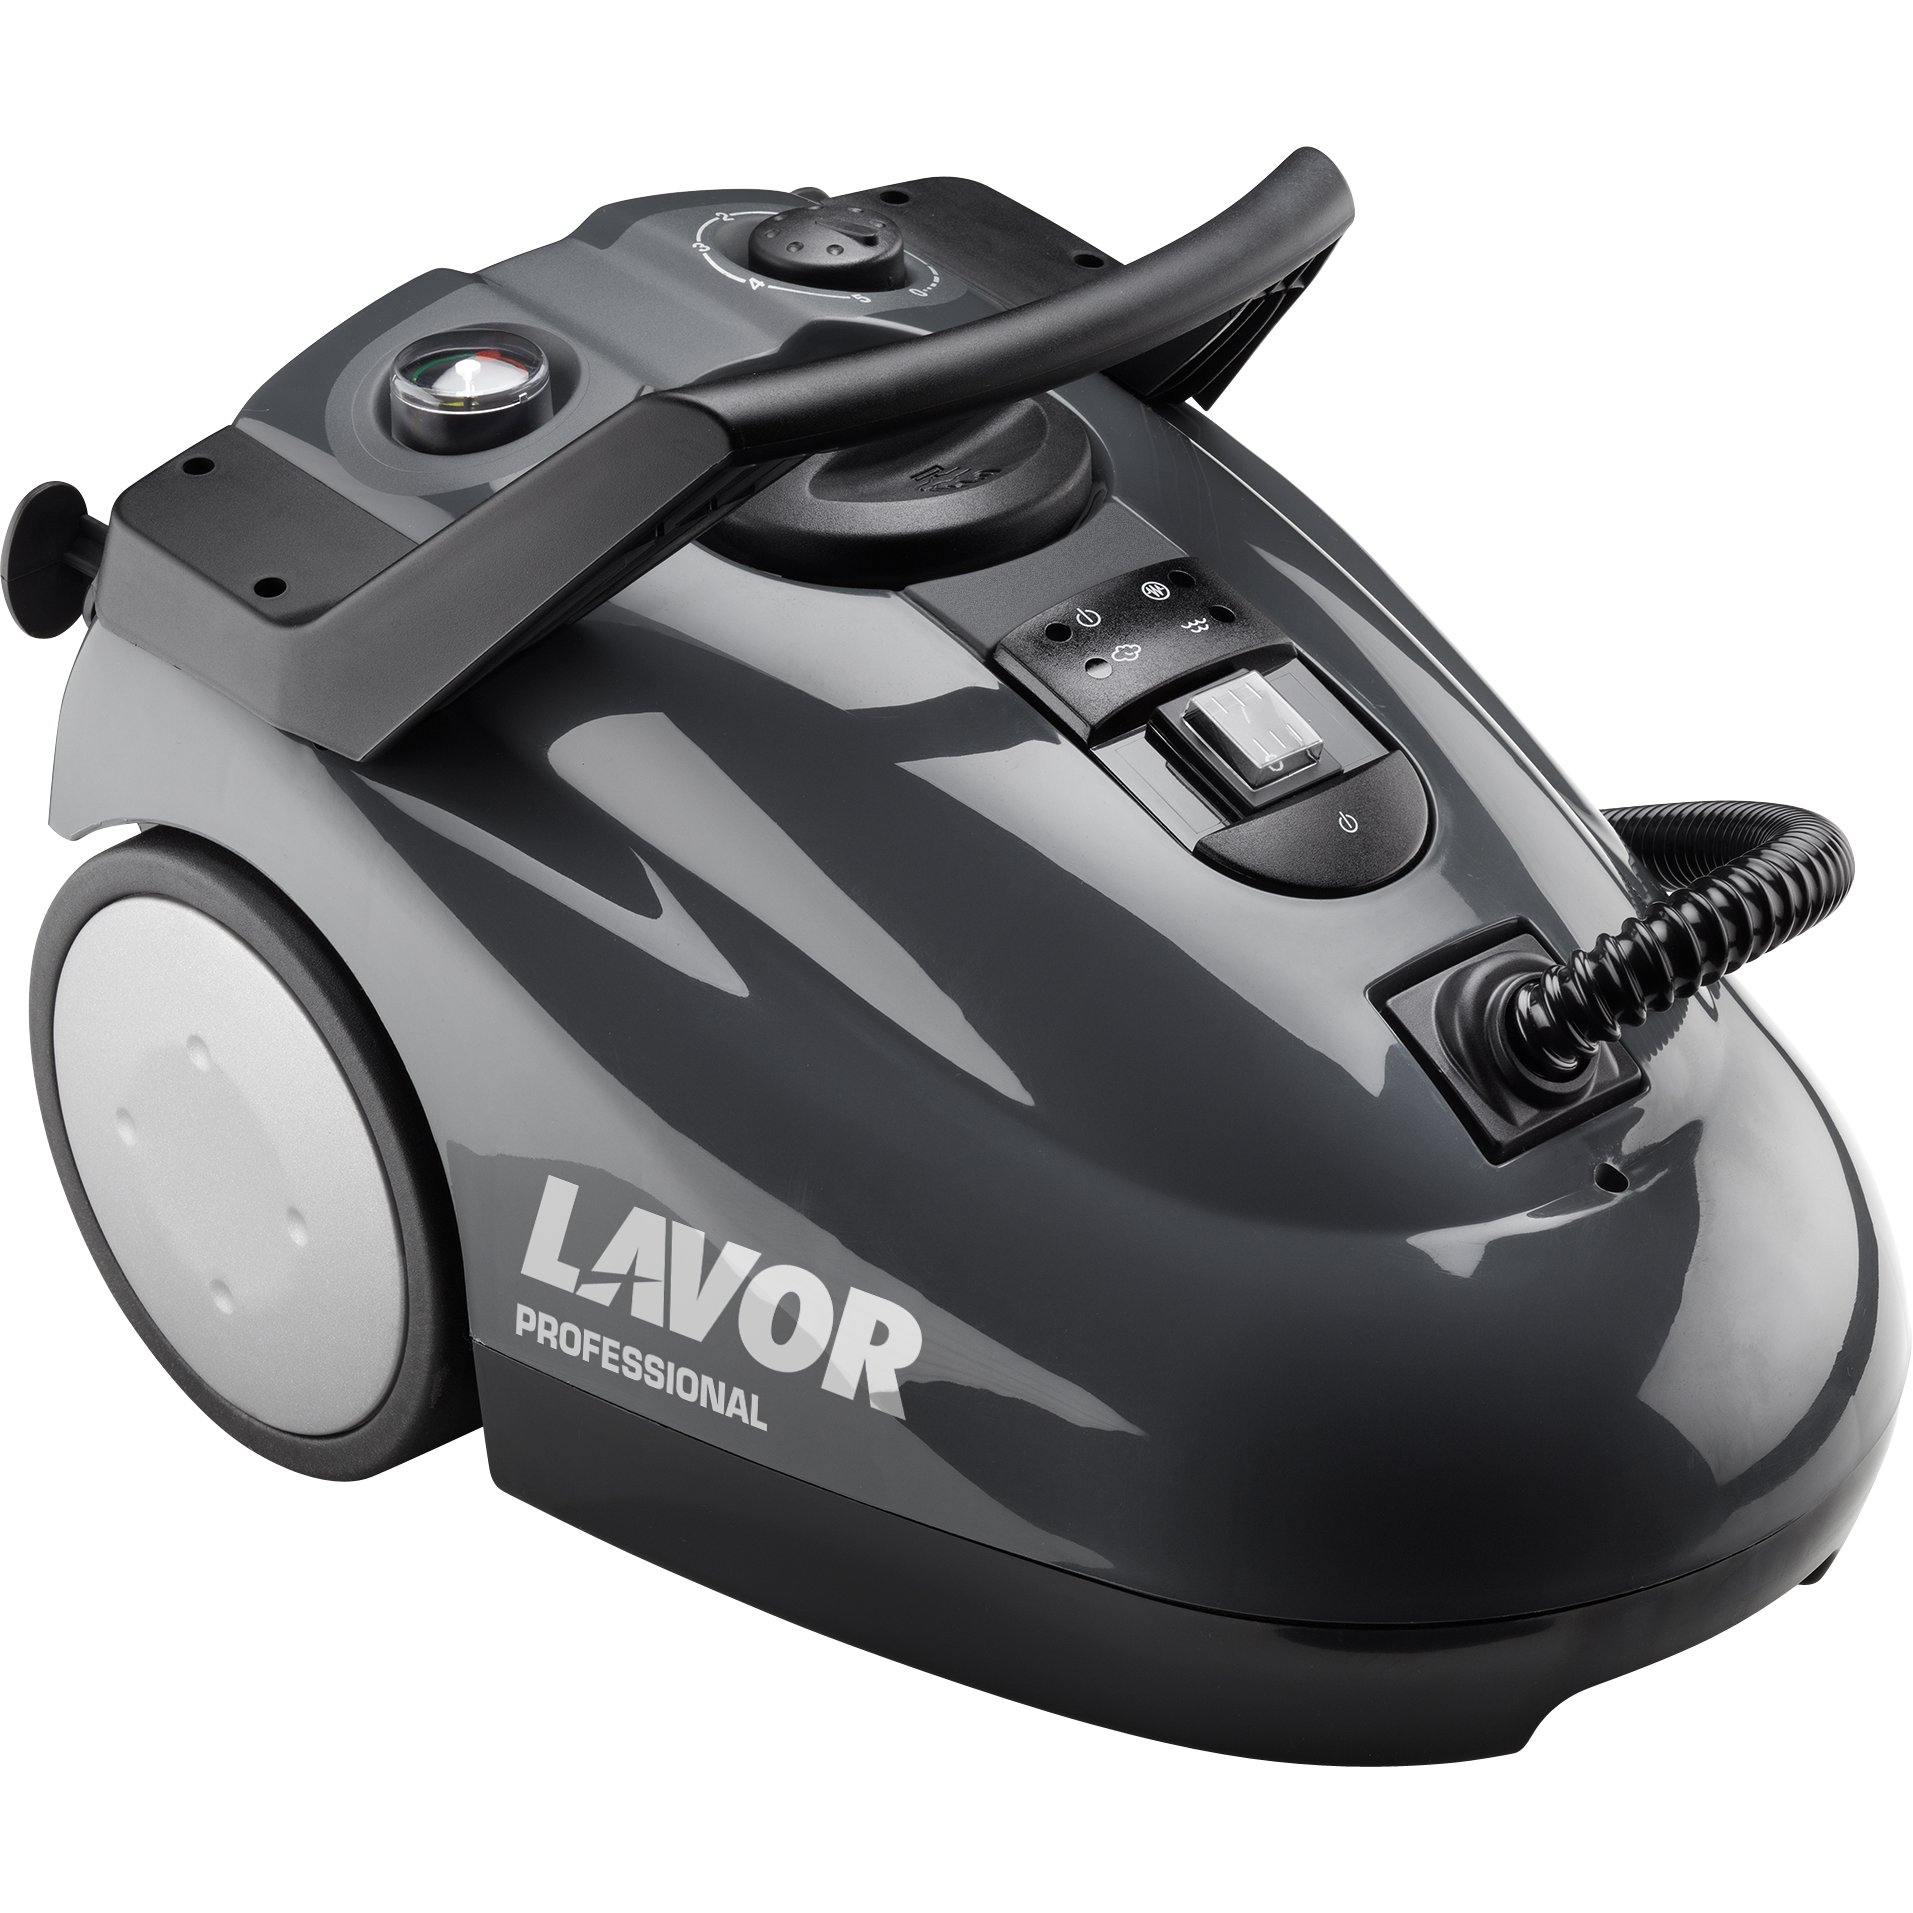 Lavor GV Kone Steam Cleaner – Professional Steam Cleaner – Spare And Square